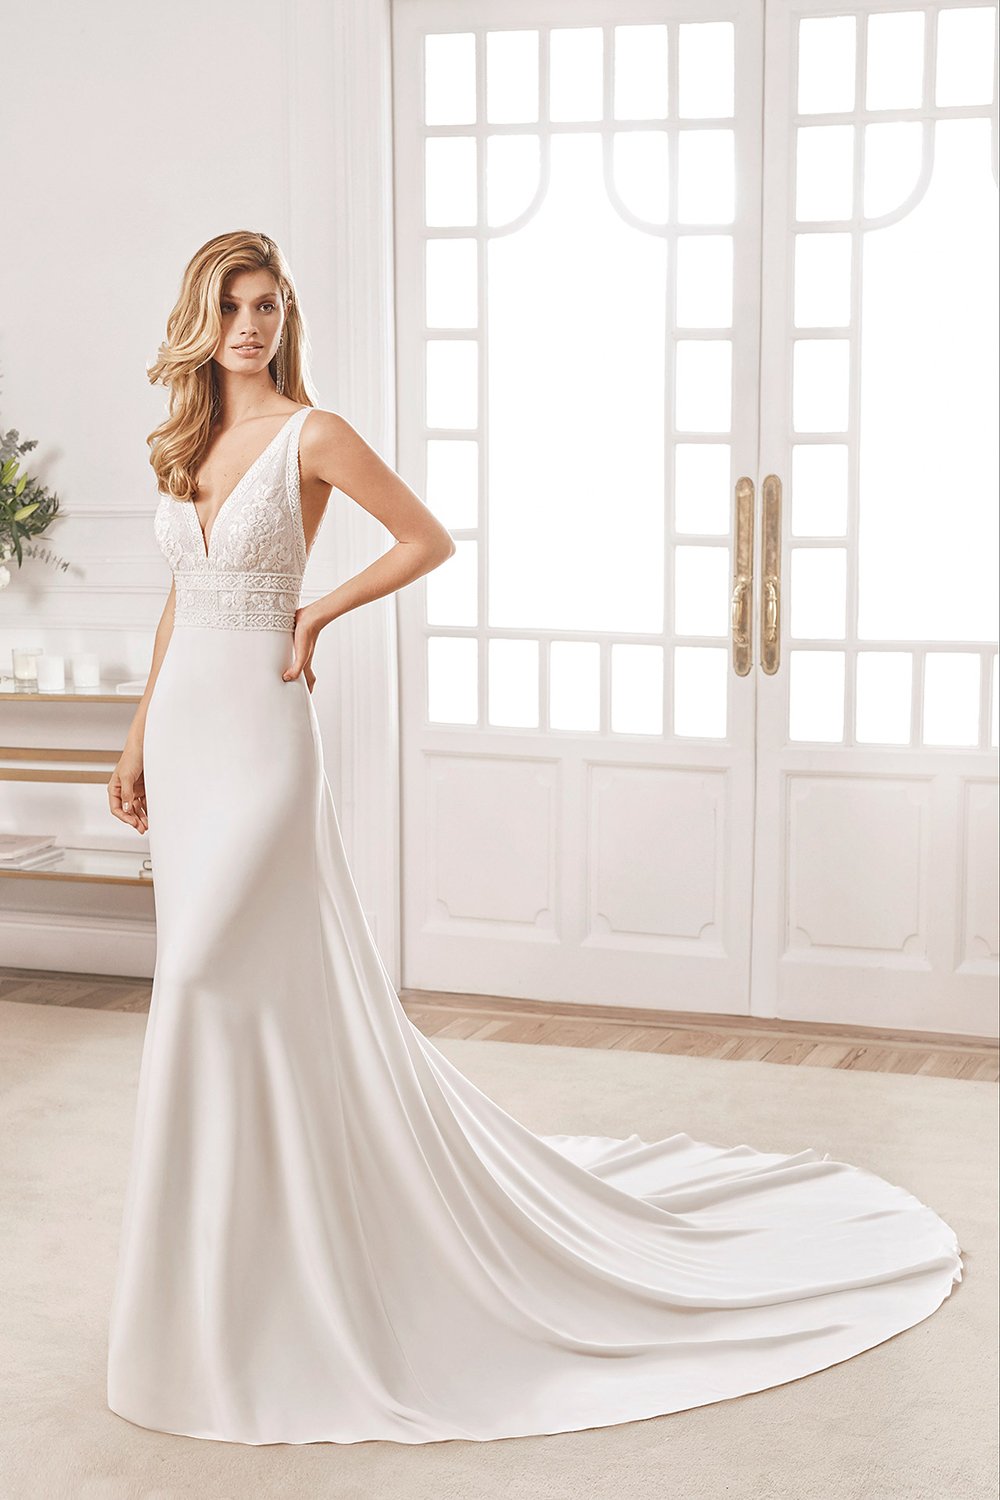 Nayira - Sample Gown, Online Sample Sale, Aire Barcelona - Sample Gown - Eternal Bridal